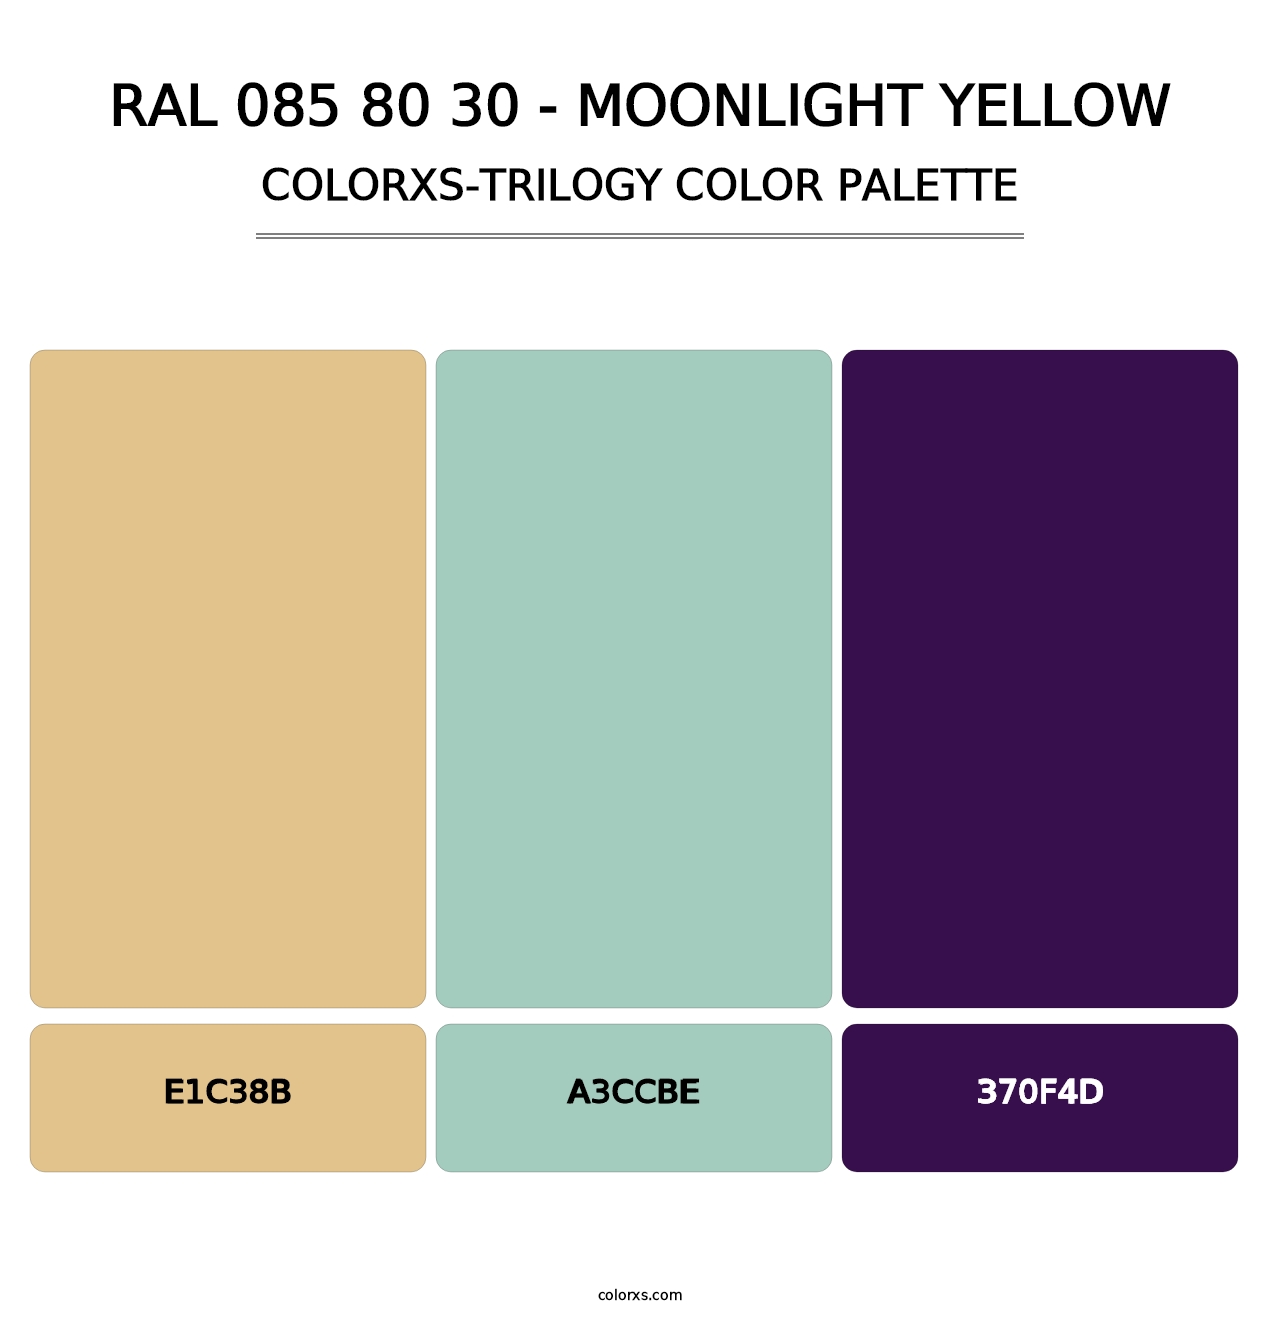 RAL 085 80 30 - Moonlight Yellow - Colorxs Trilogy Palette